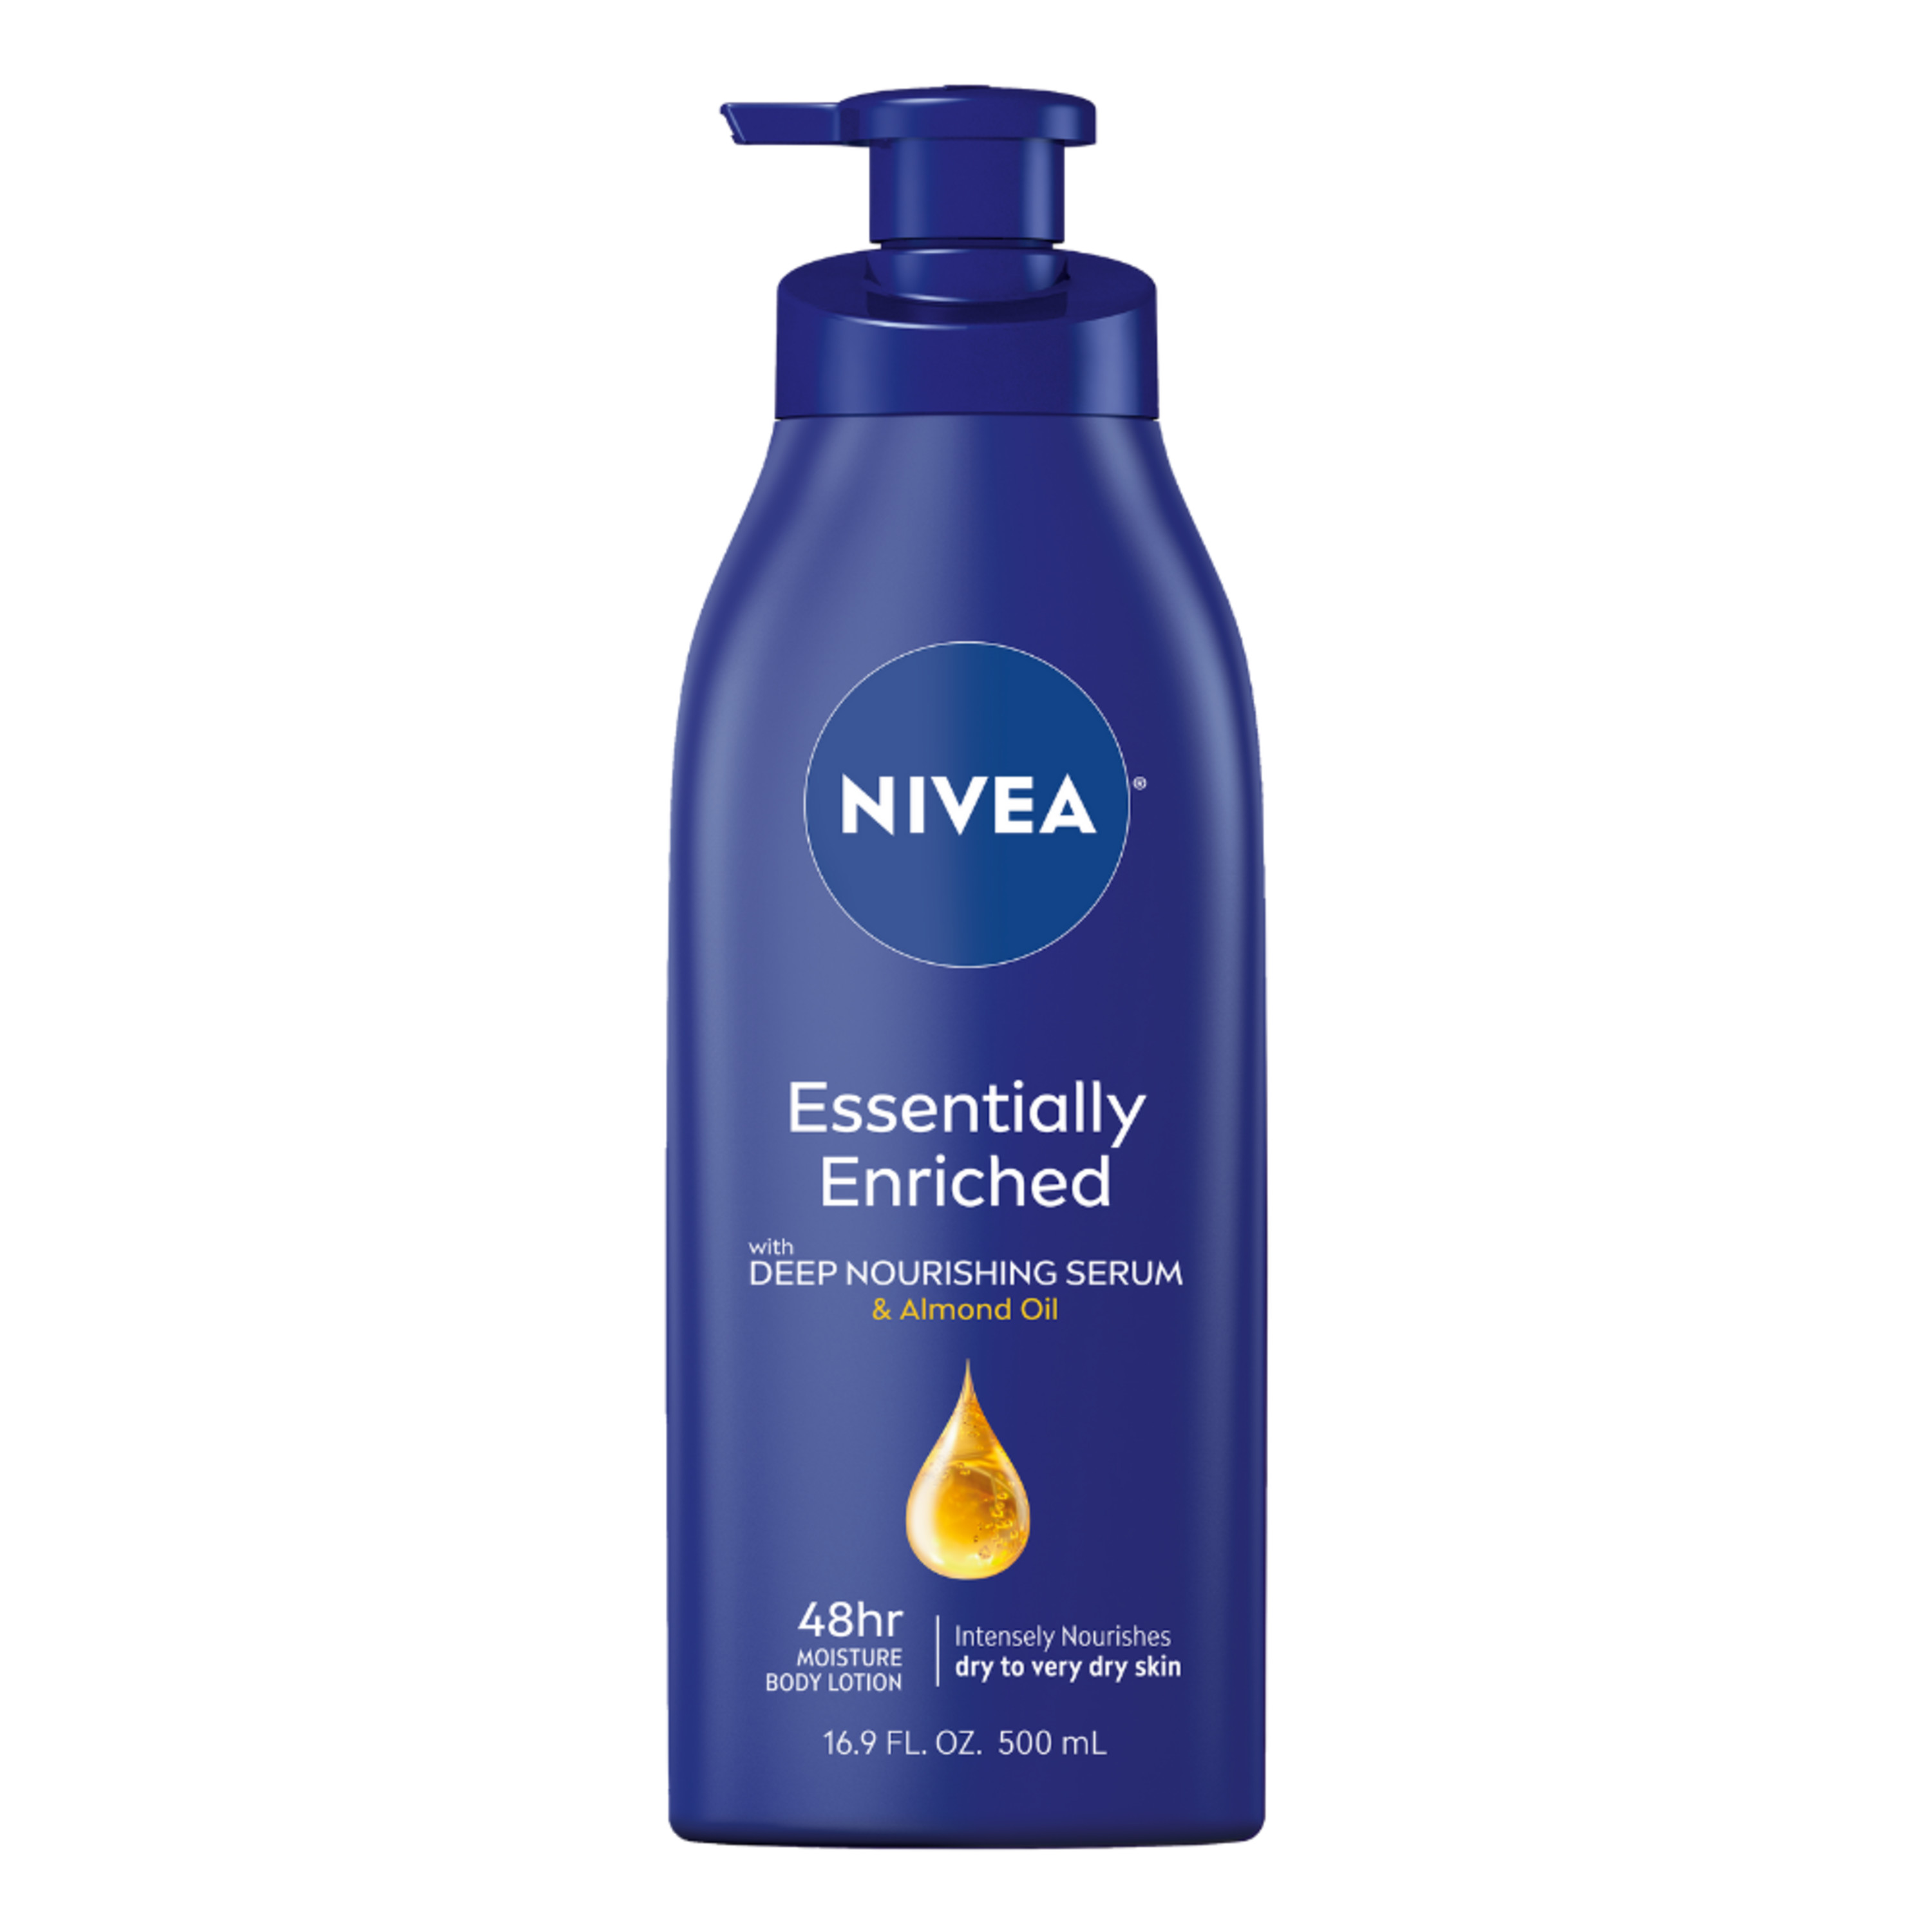 NIVEA Essentially Enriched Body Lotion for Dry Skin, 16.9 Fl Oz Pump Bottle - image 3 of 13